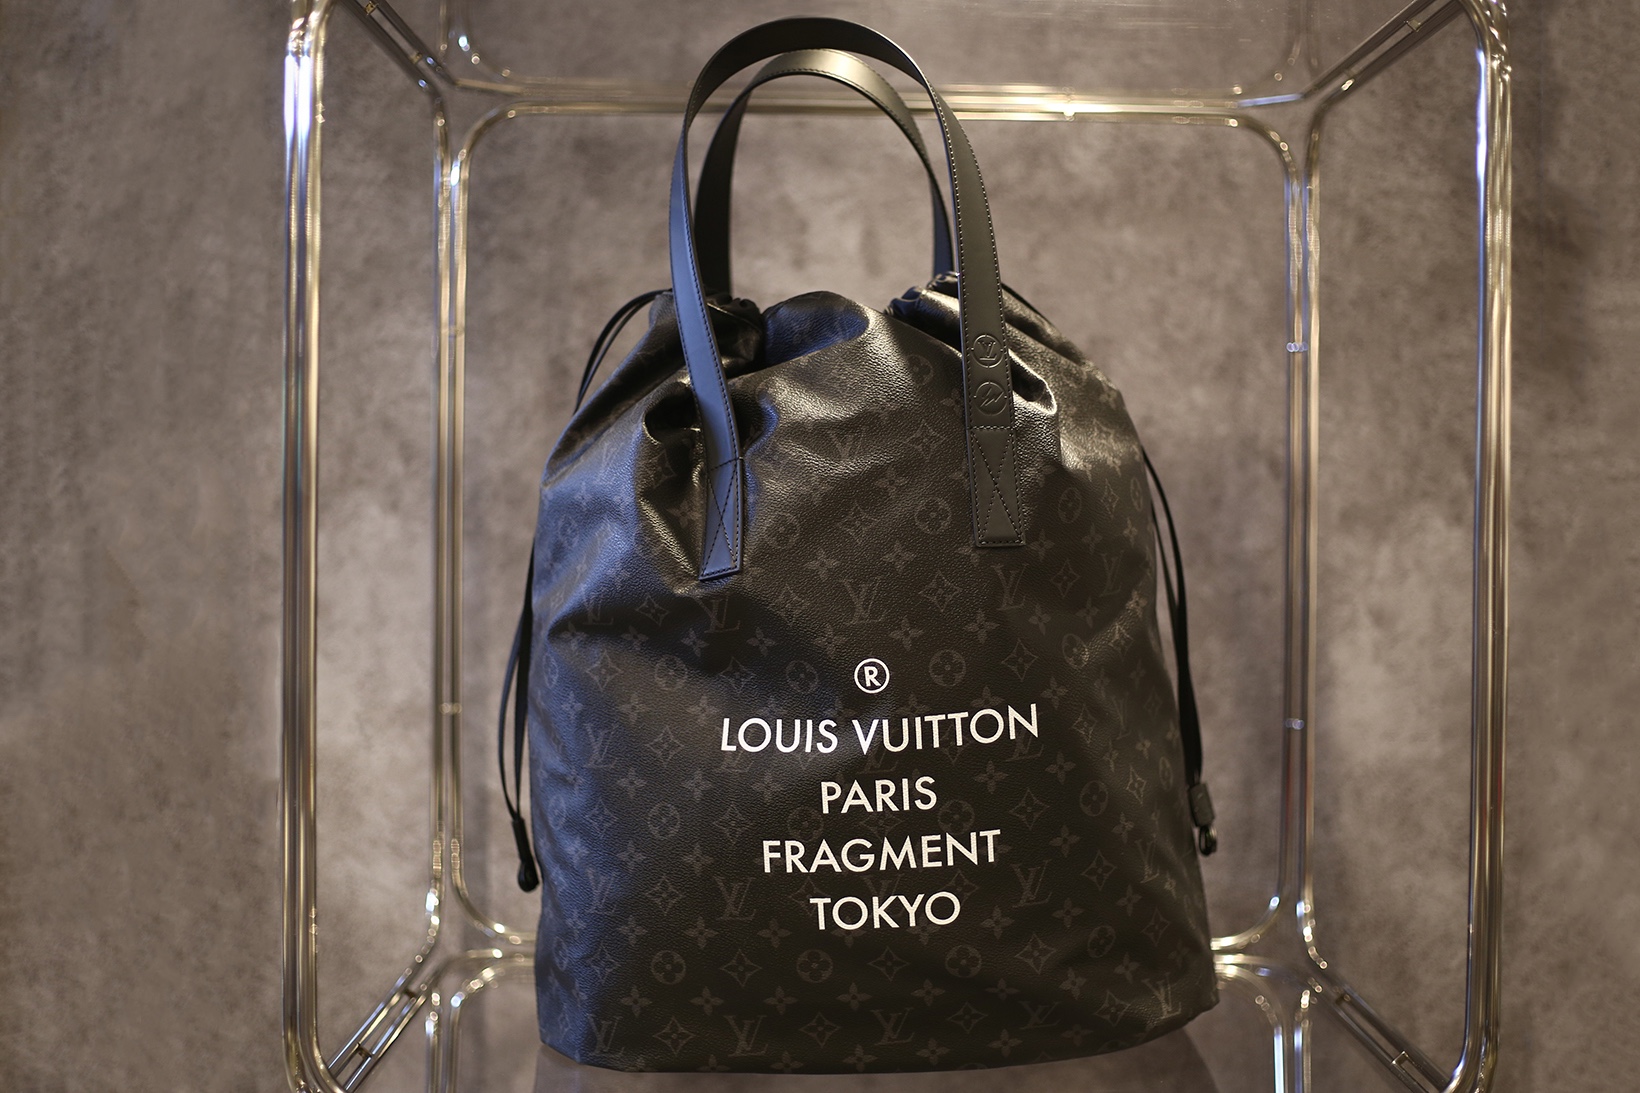 Check out the uber-chic Louis Vuitton X Fragment design Pop up at Harrods, London